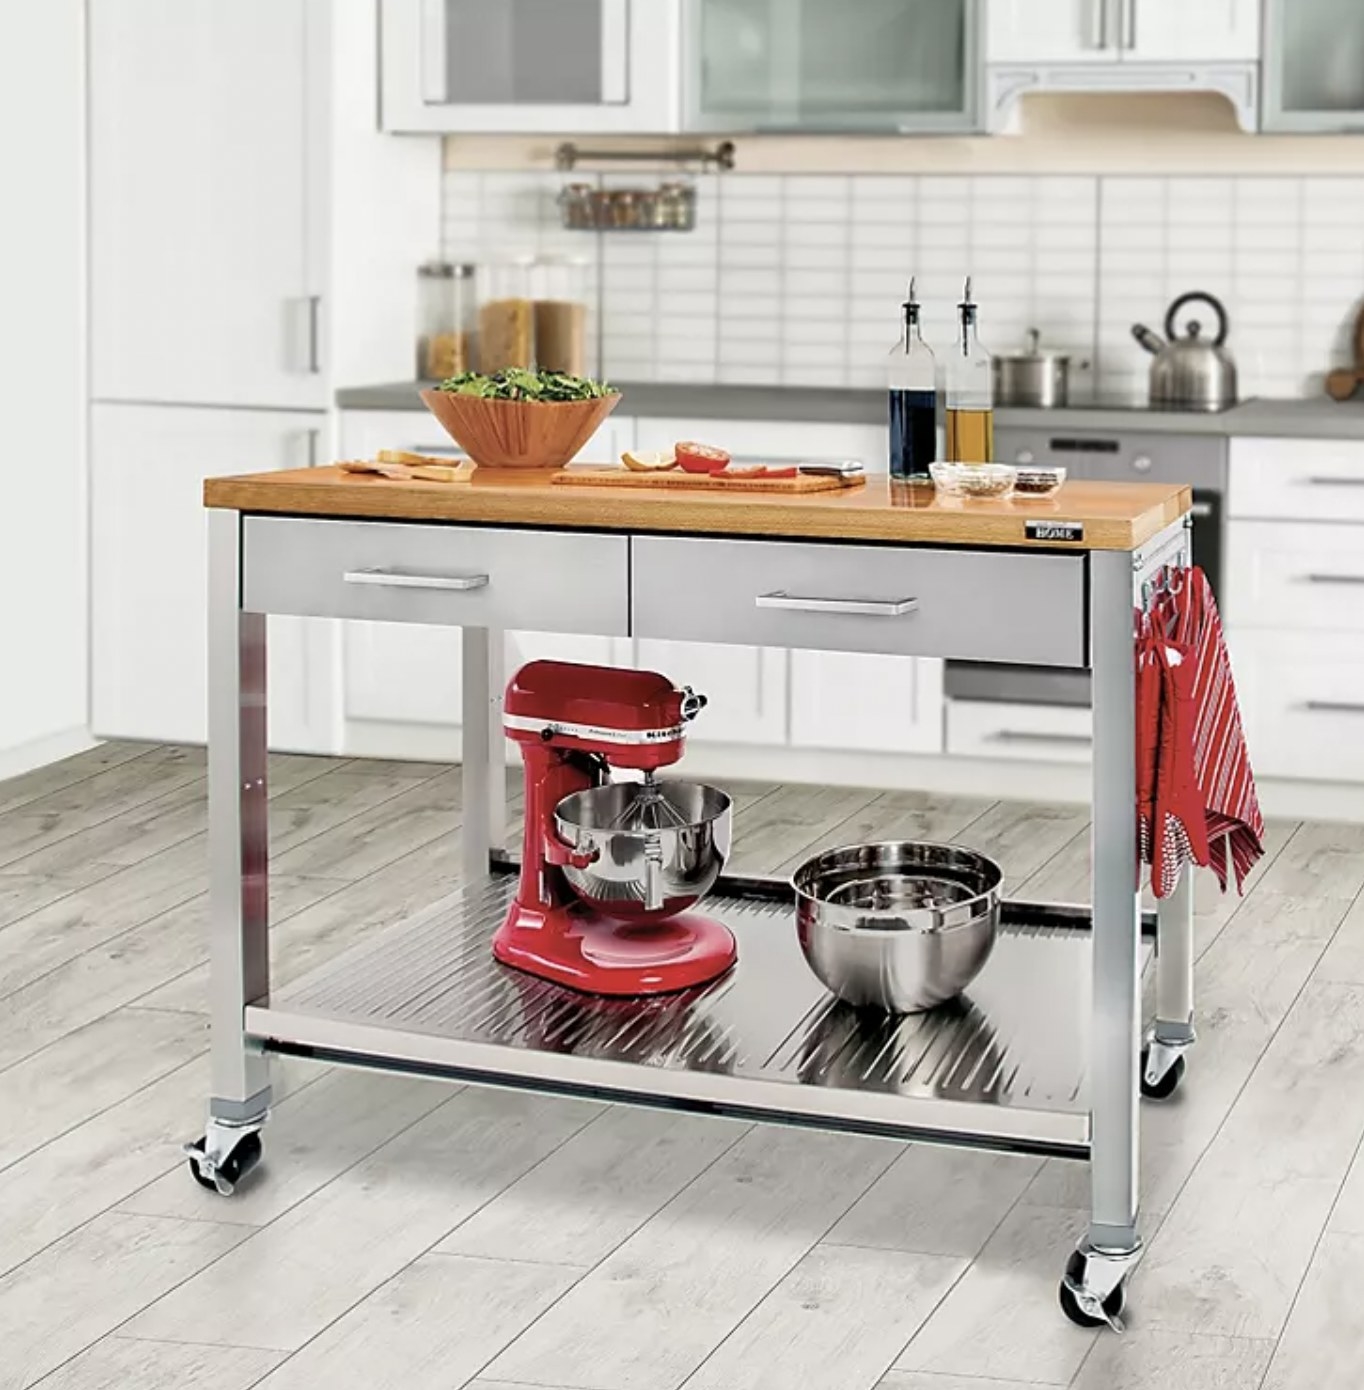 The cart on castor wheels in kitchen with Kitchen Aid and bowls on bottom shelf, towels and mitts on side hooks, and a salad being prepped on wooden surface